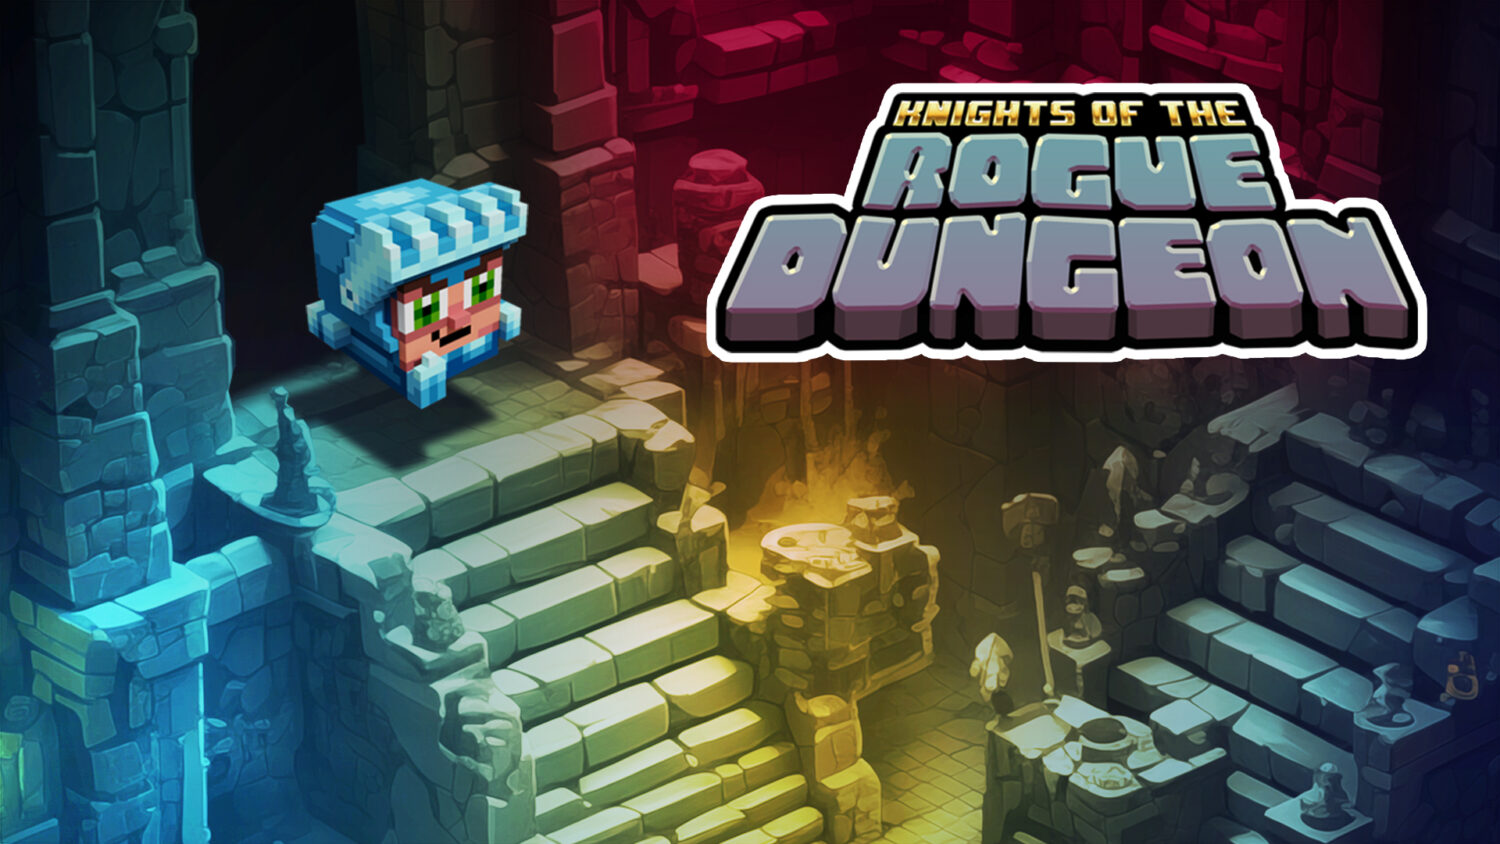 Knights of the Rogue Dungeon - Nintendo Switch